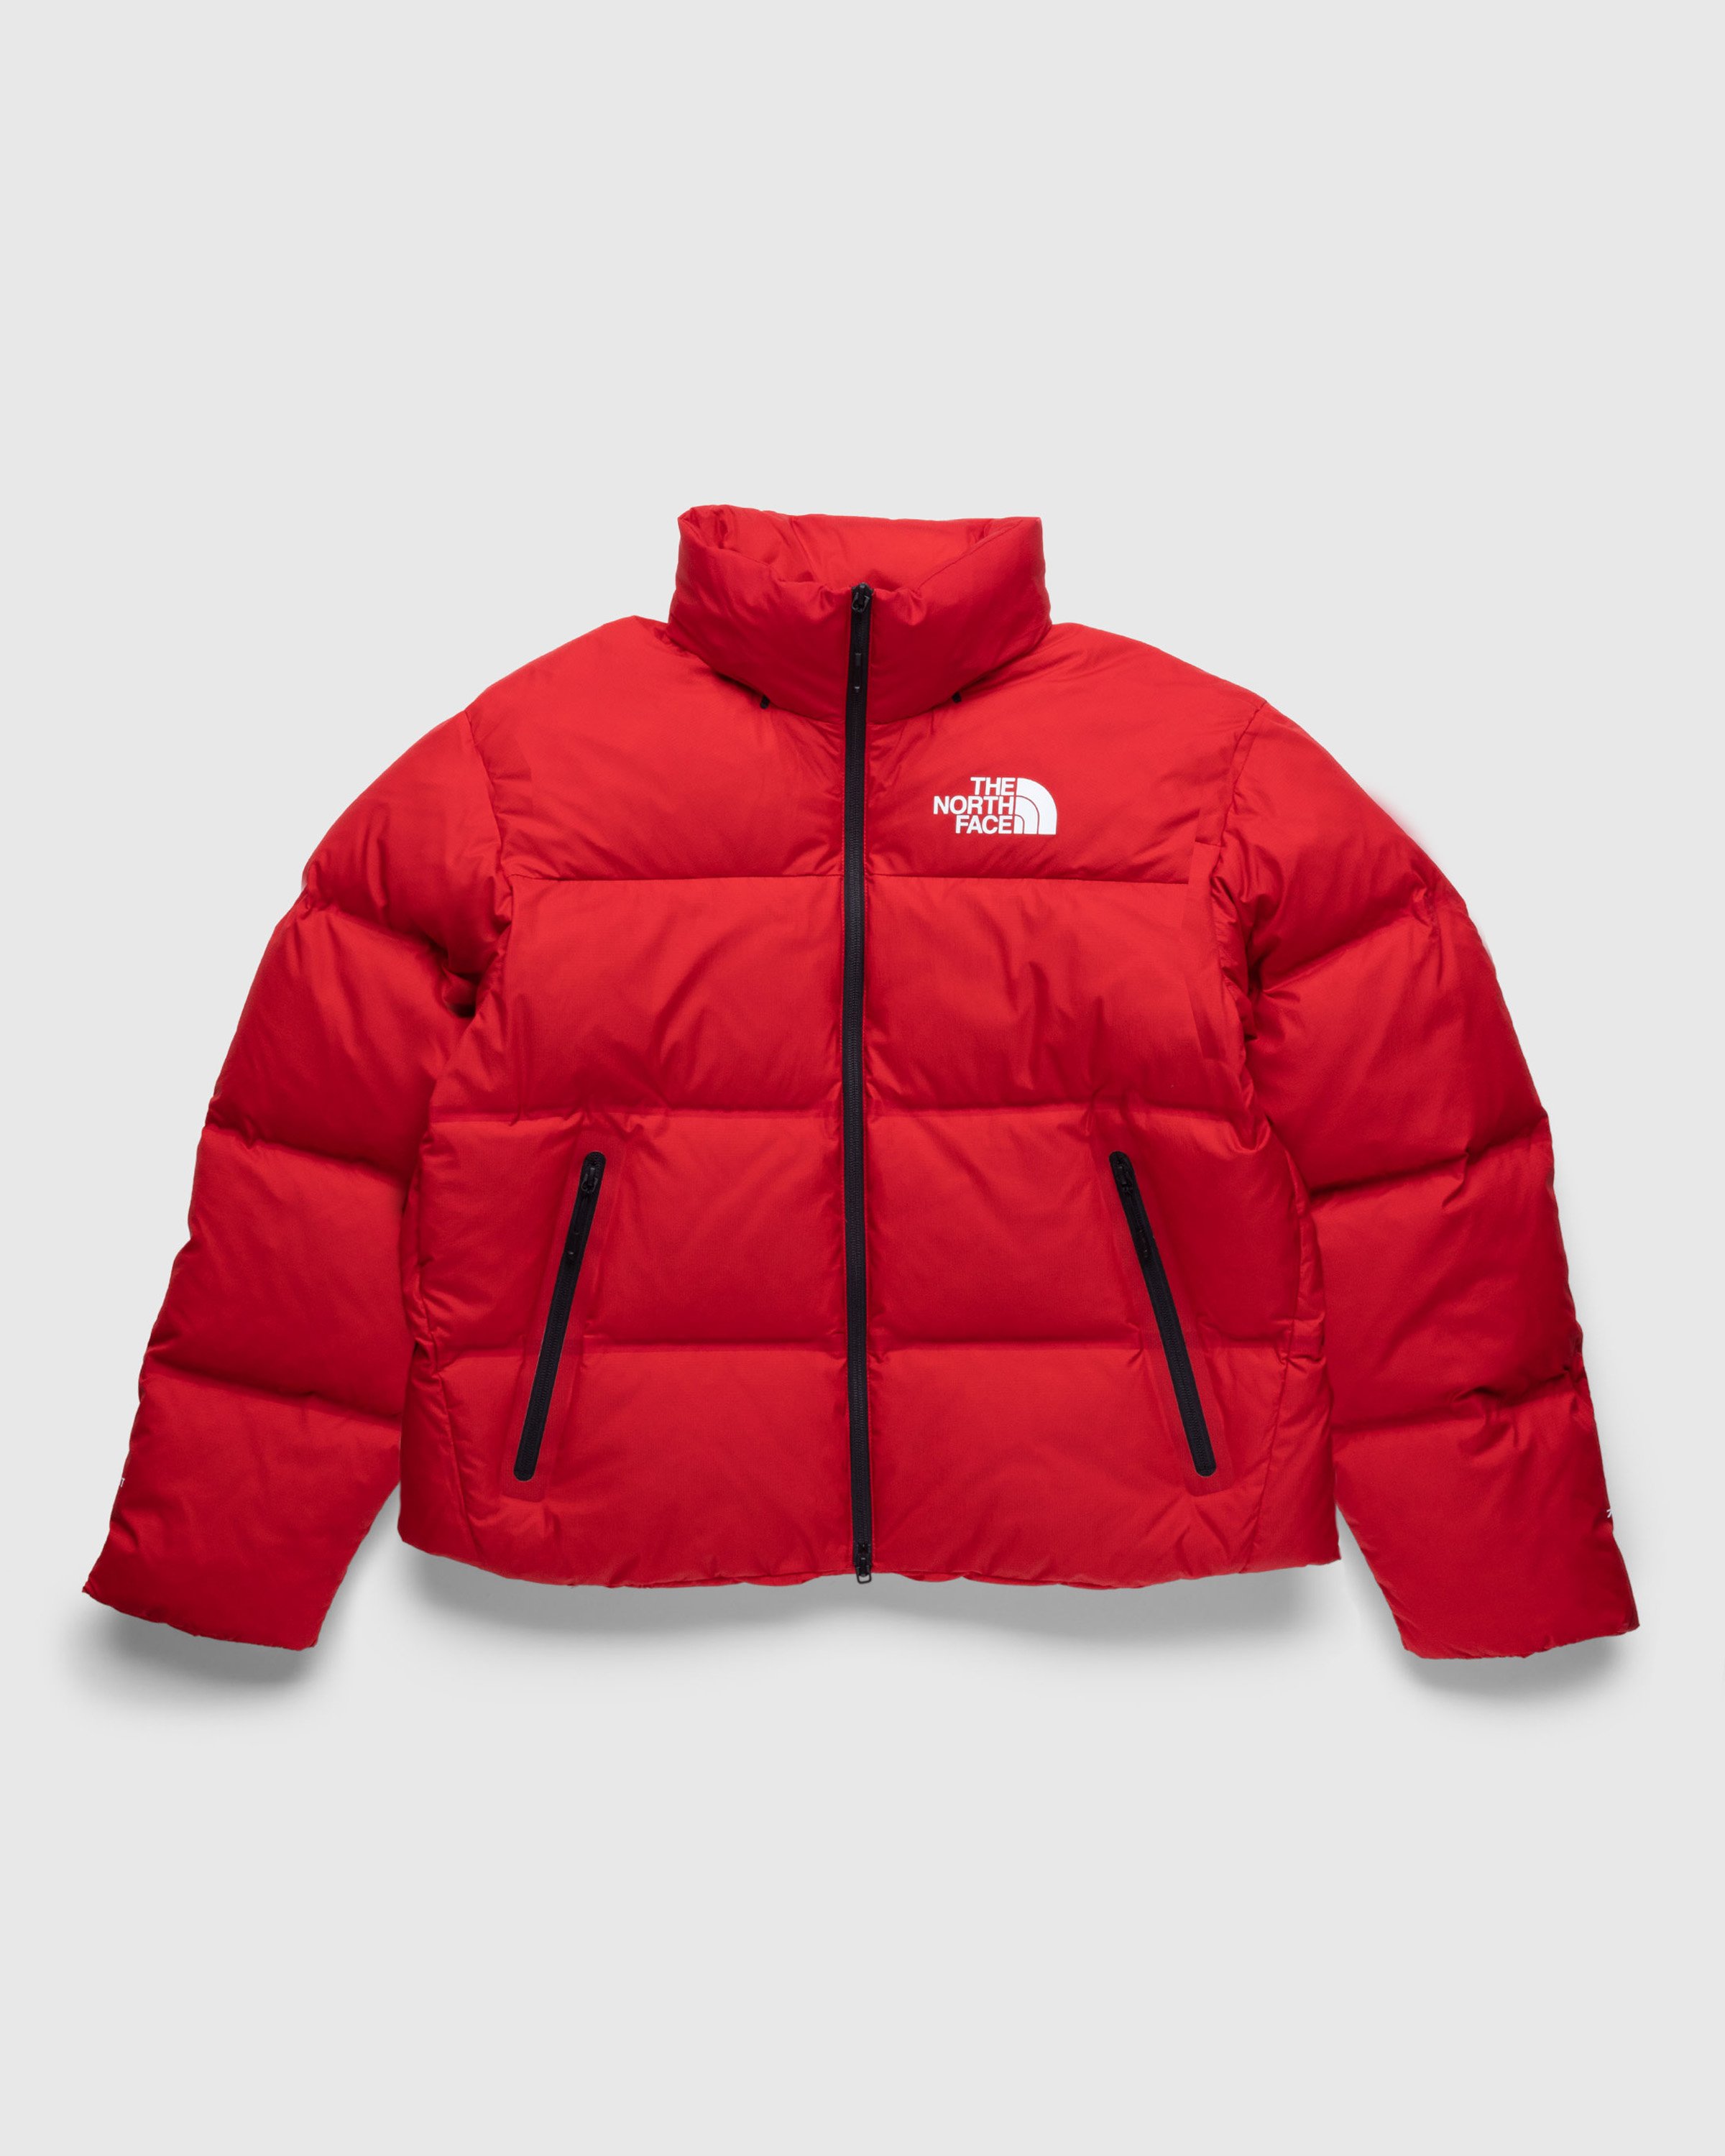 The North Face - Rmst Nuptse Jacket Red - Clothing - Red - Image 1